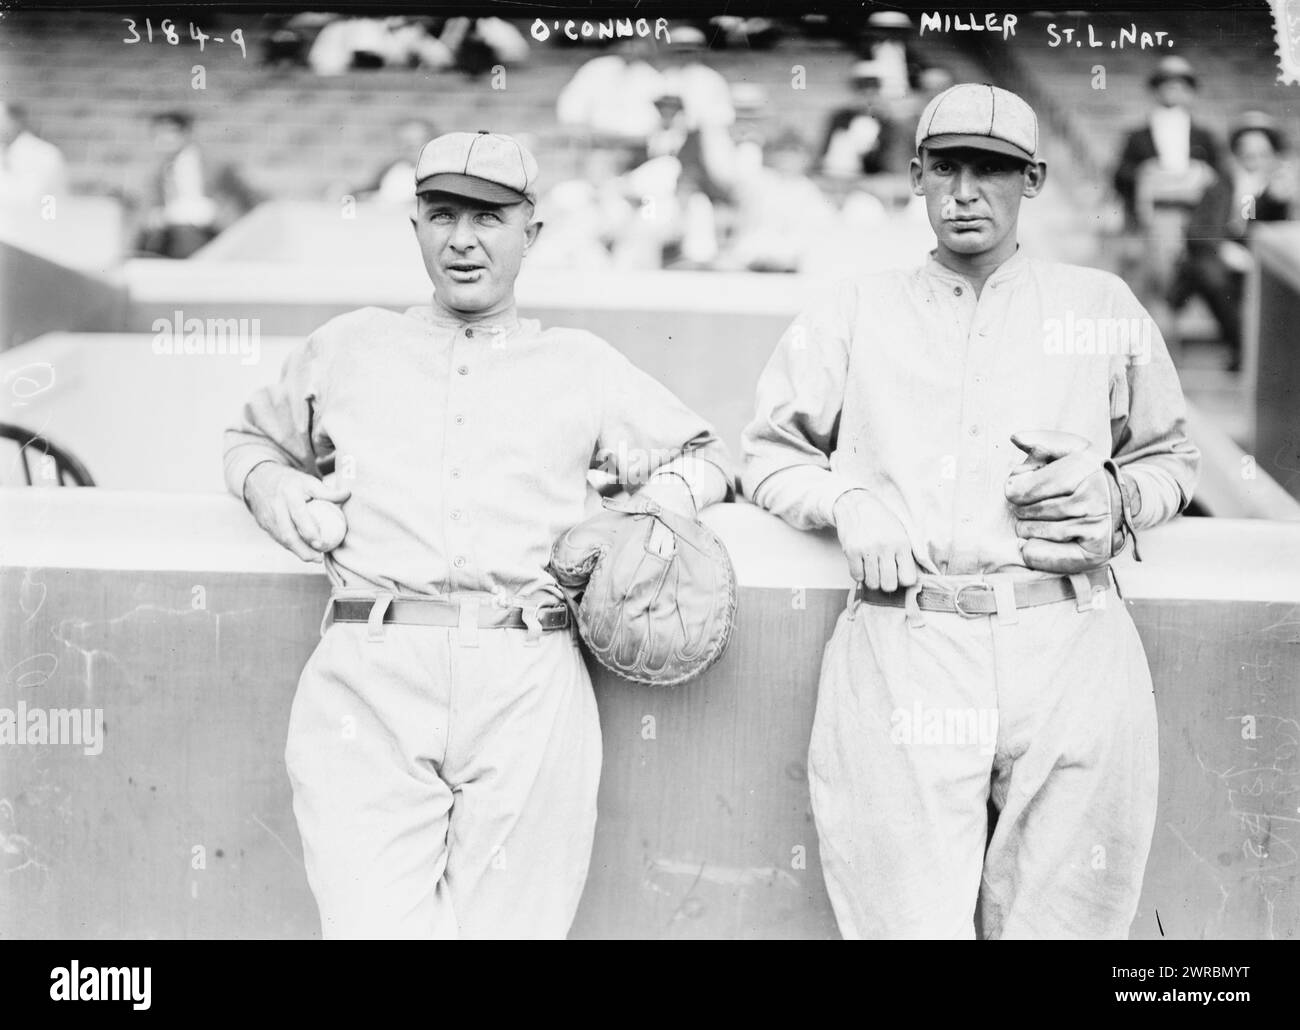 Paddy O'Connor & Dots Miller, St. Louis NL (baseball), Photograph shows baseball players John Barney 'Dots' Miller (1886-1923) and Patrick Francis O'Connor (1879-1950)., 1914 Aug, 11, Glass negatives, 1 negative: glass Stock Photo